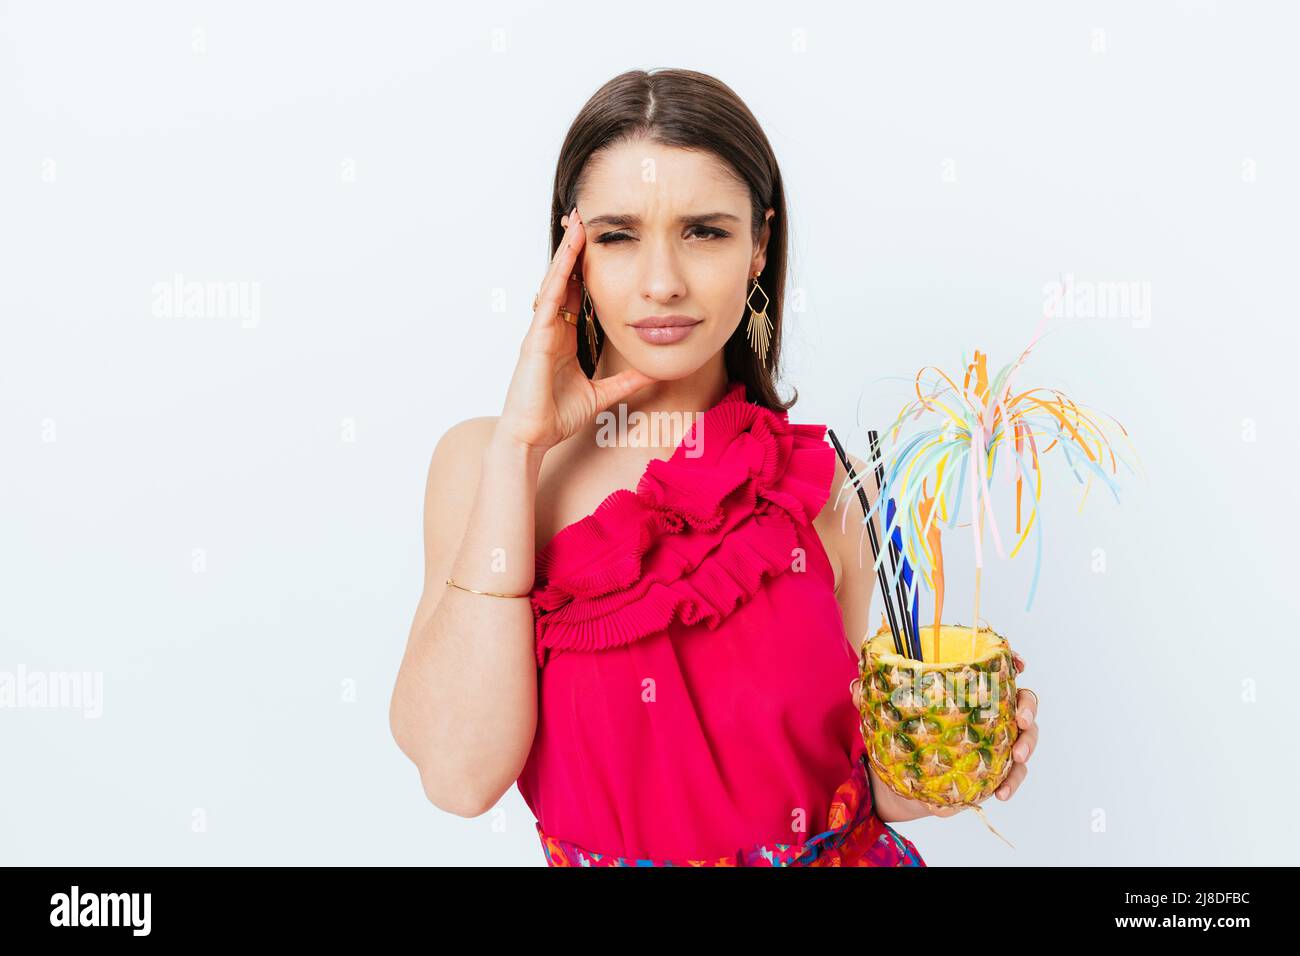 Beautiful fashionable young woman holding festive pineapple cocktail tiredly holding her head squinting her eyes Stock Photo